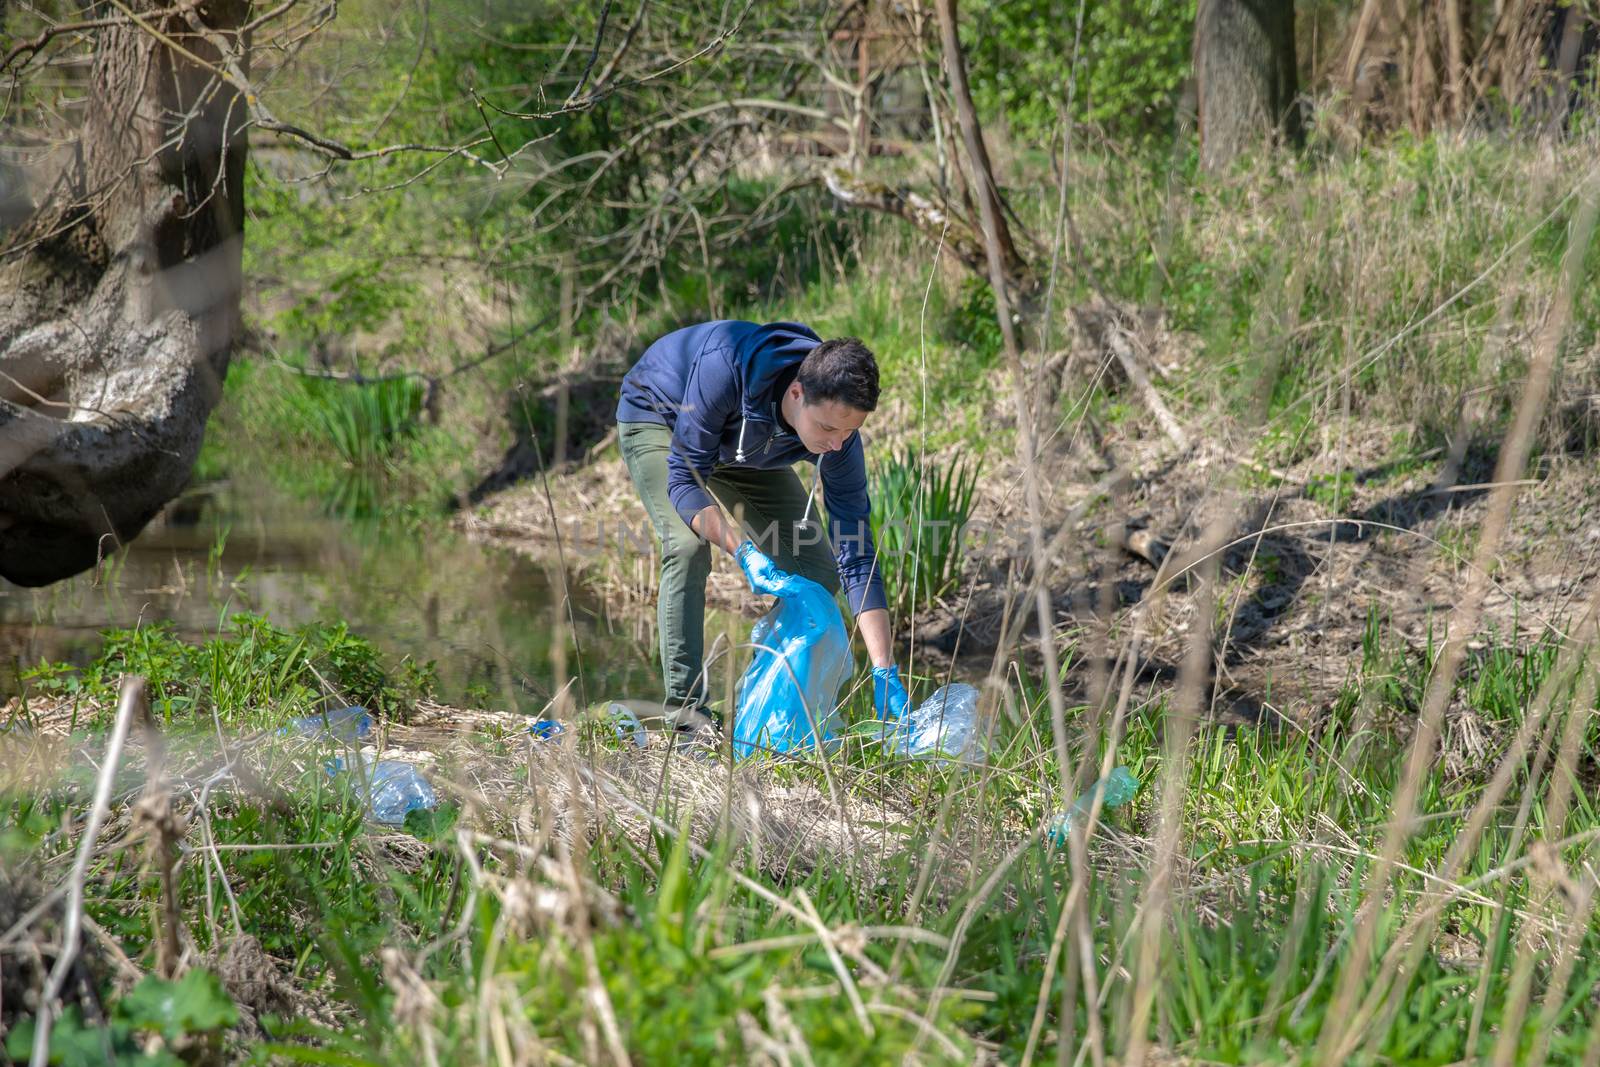 collecting garbage in a plastic bag, a volunteer man helps in the forest on the river bank by Edophoto